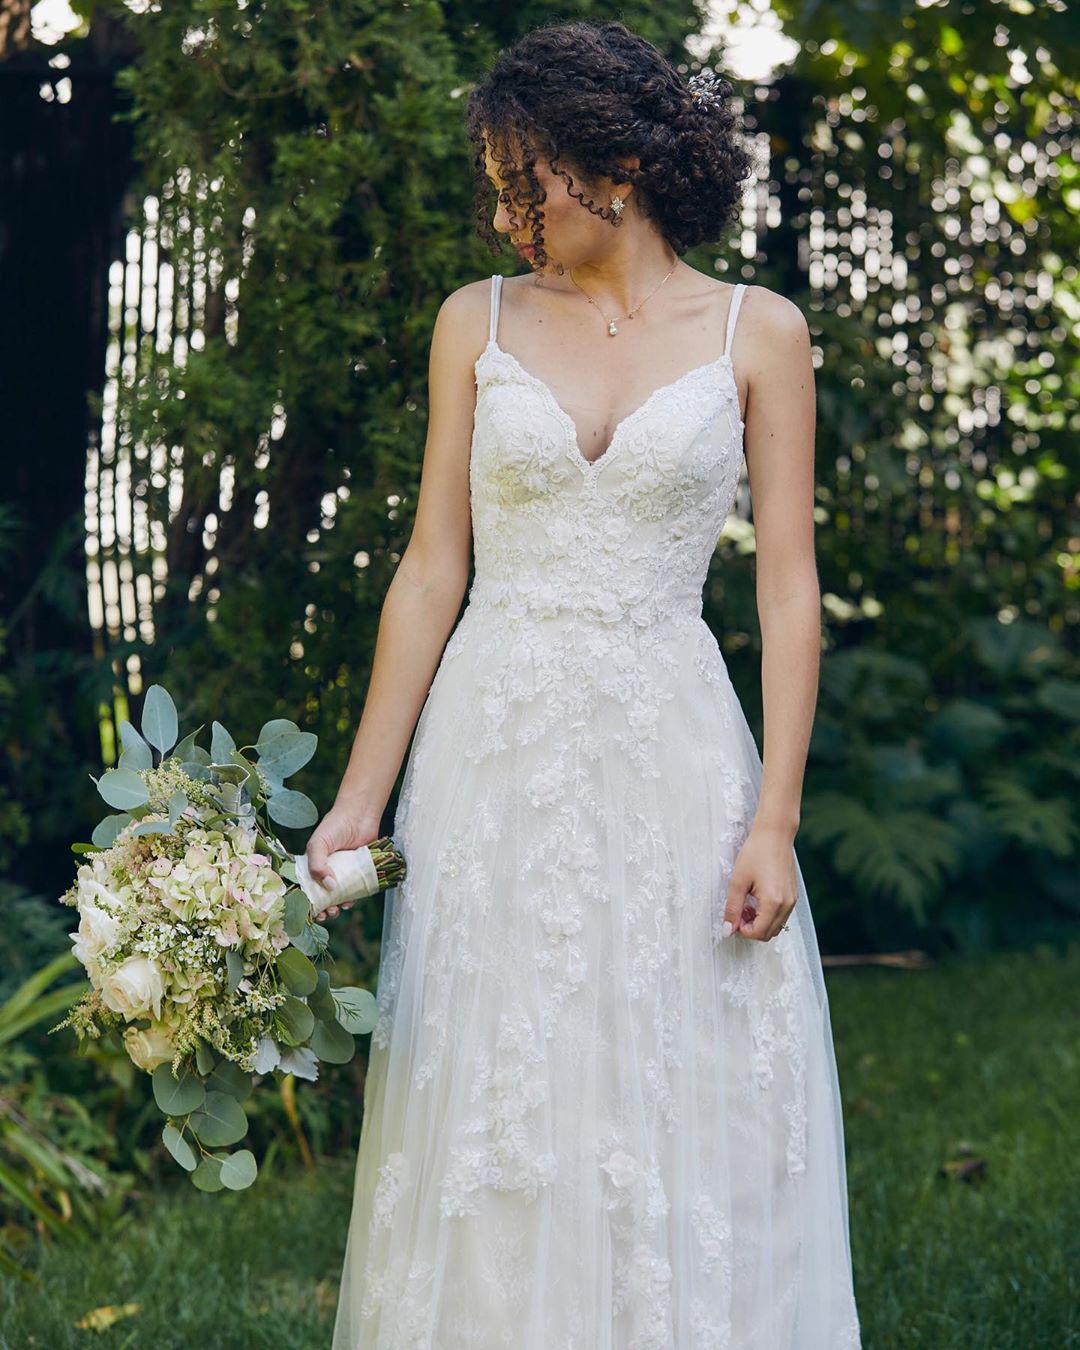  Long A-Line Beach Wedding Dress - Melissa Sweet Share this: bride benefits -buy the gown, get the perks! - LEARN MORE  Scalloped A-Line Wedding Dress with Double Straps 